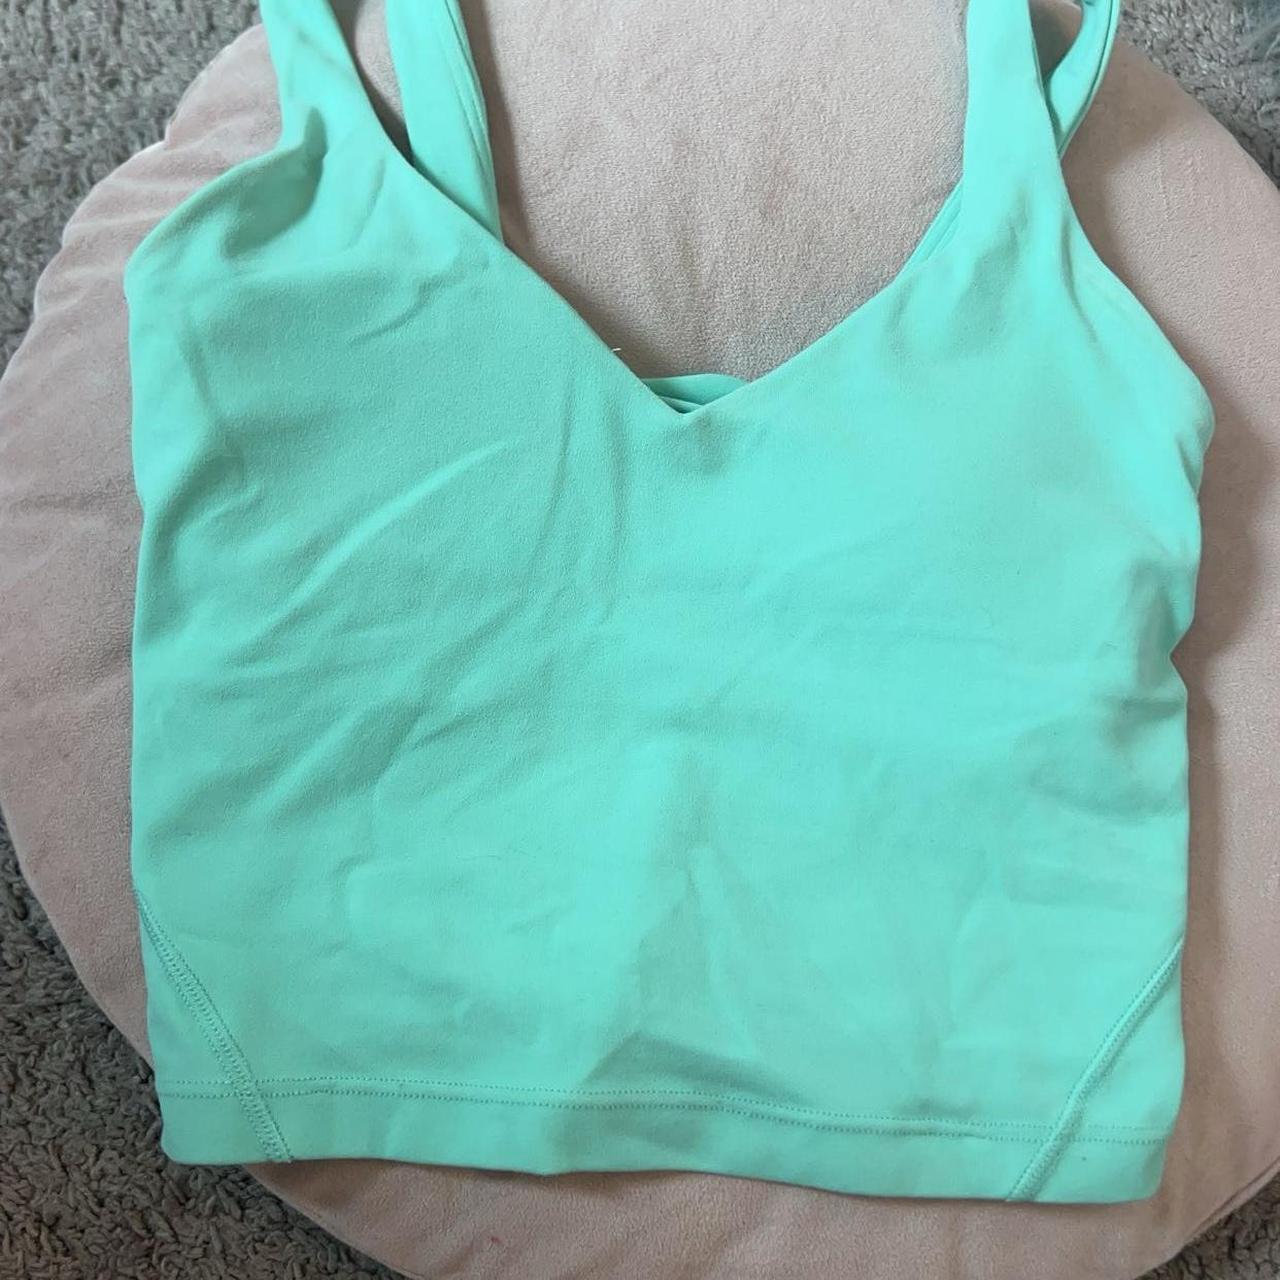 Lululemon Align Tank Chambray Size 0 worn once to - Depop